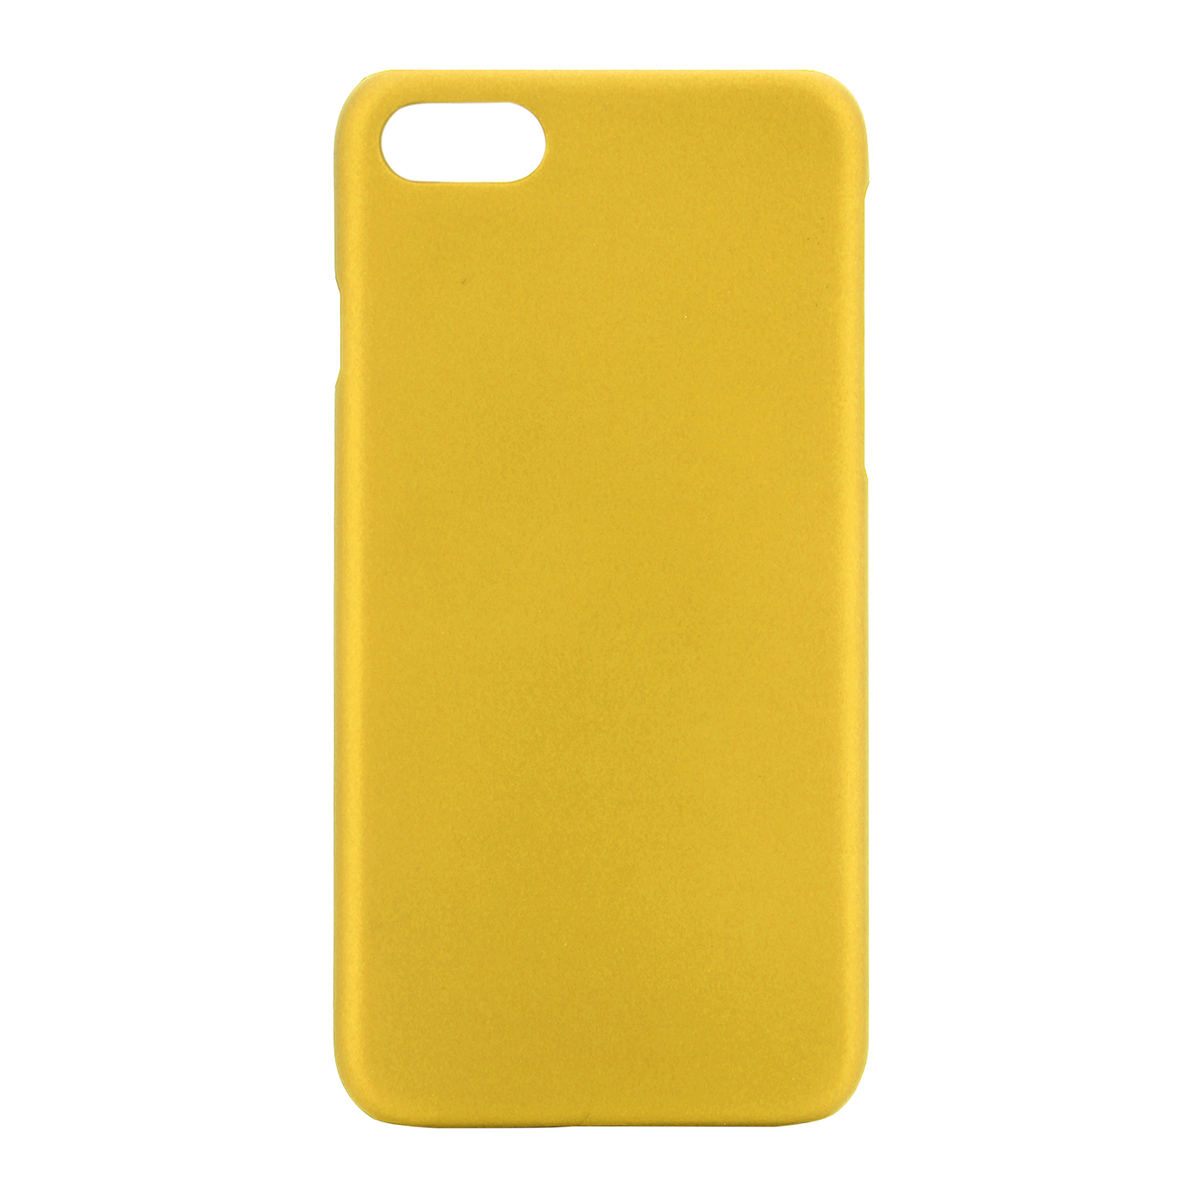 Multicolor Frosted Hard PC Protective Back Phone Case for iPhone 7 - Yellow